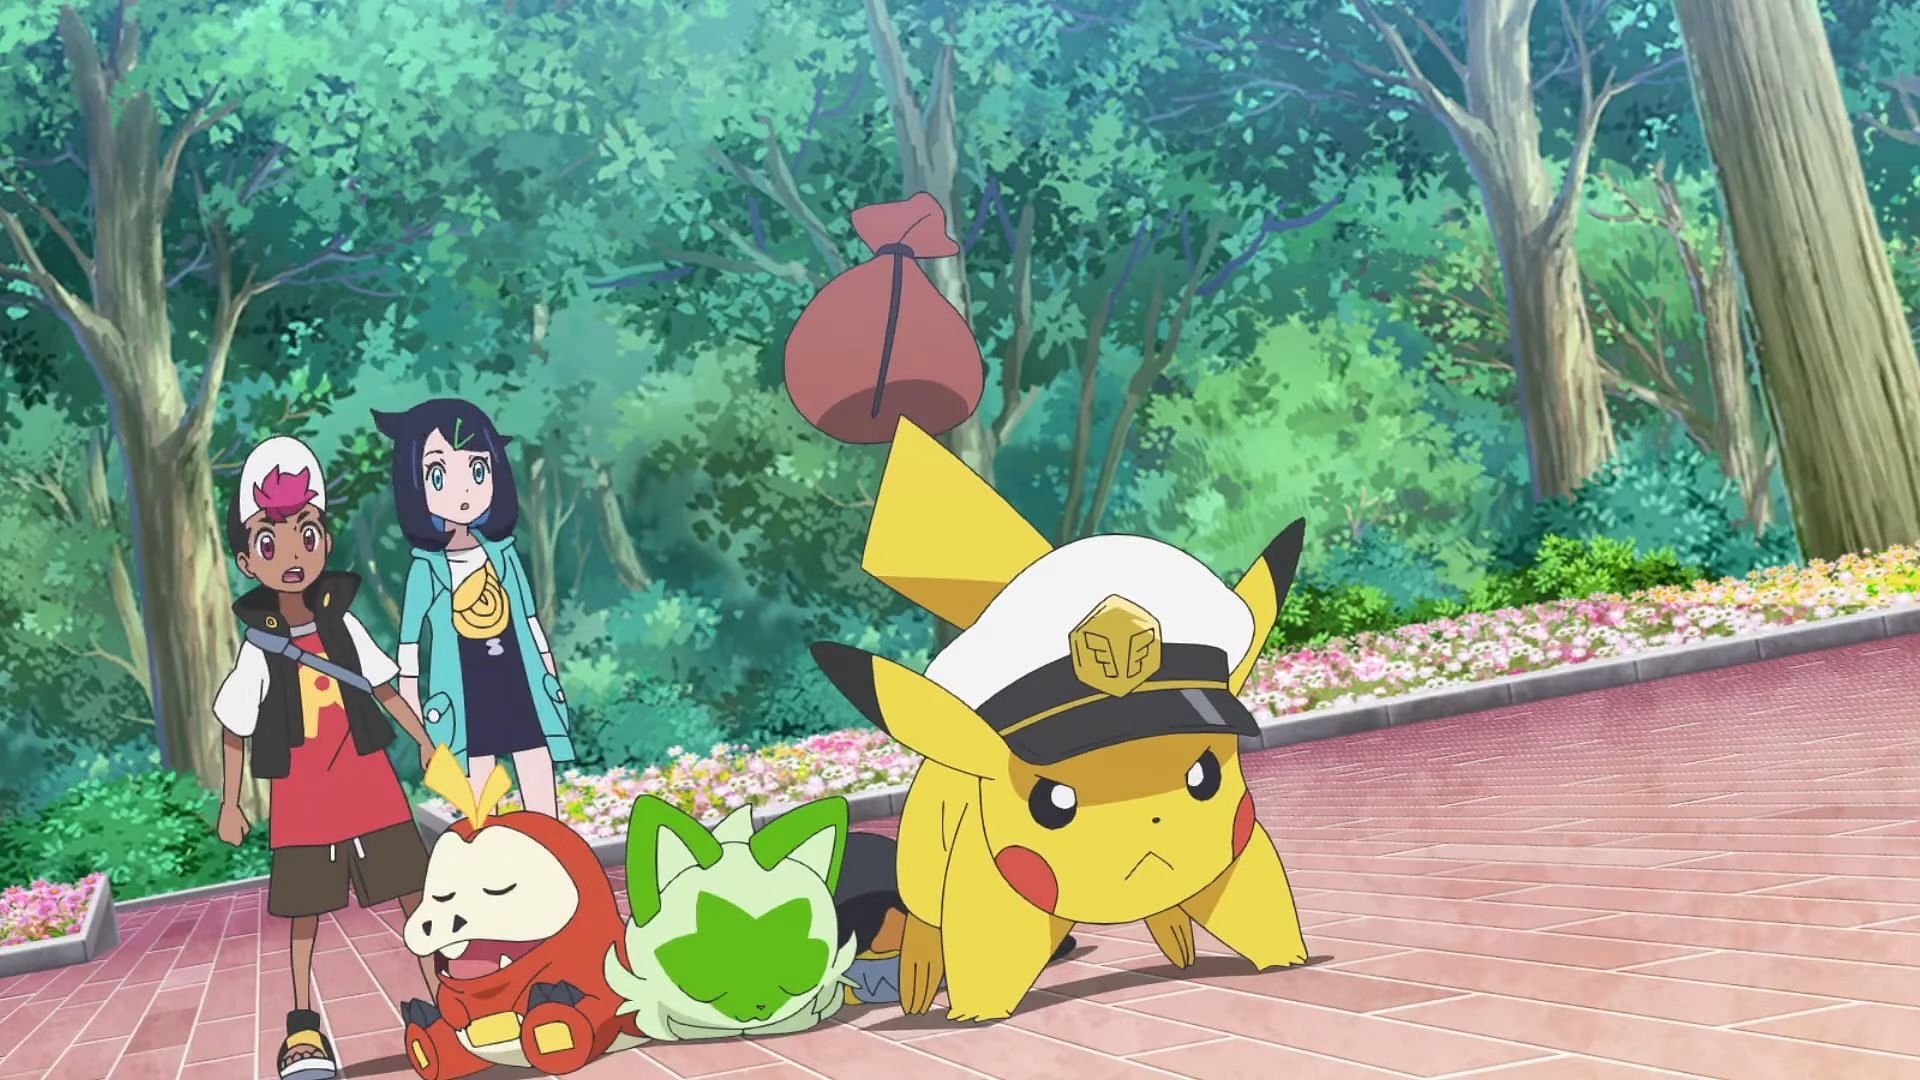 Captain Pikachu springs into action to assist the Pokemon Horizons protagonists (Image via The Pokemon Company)